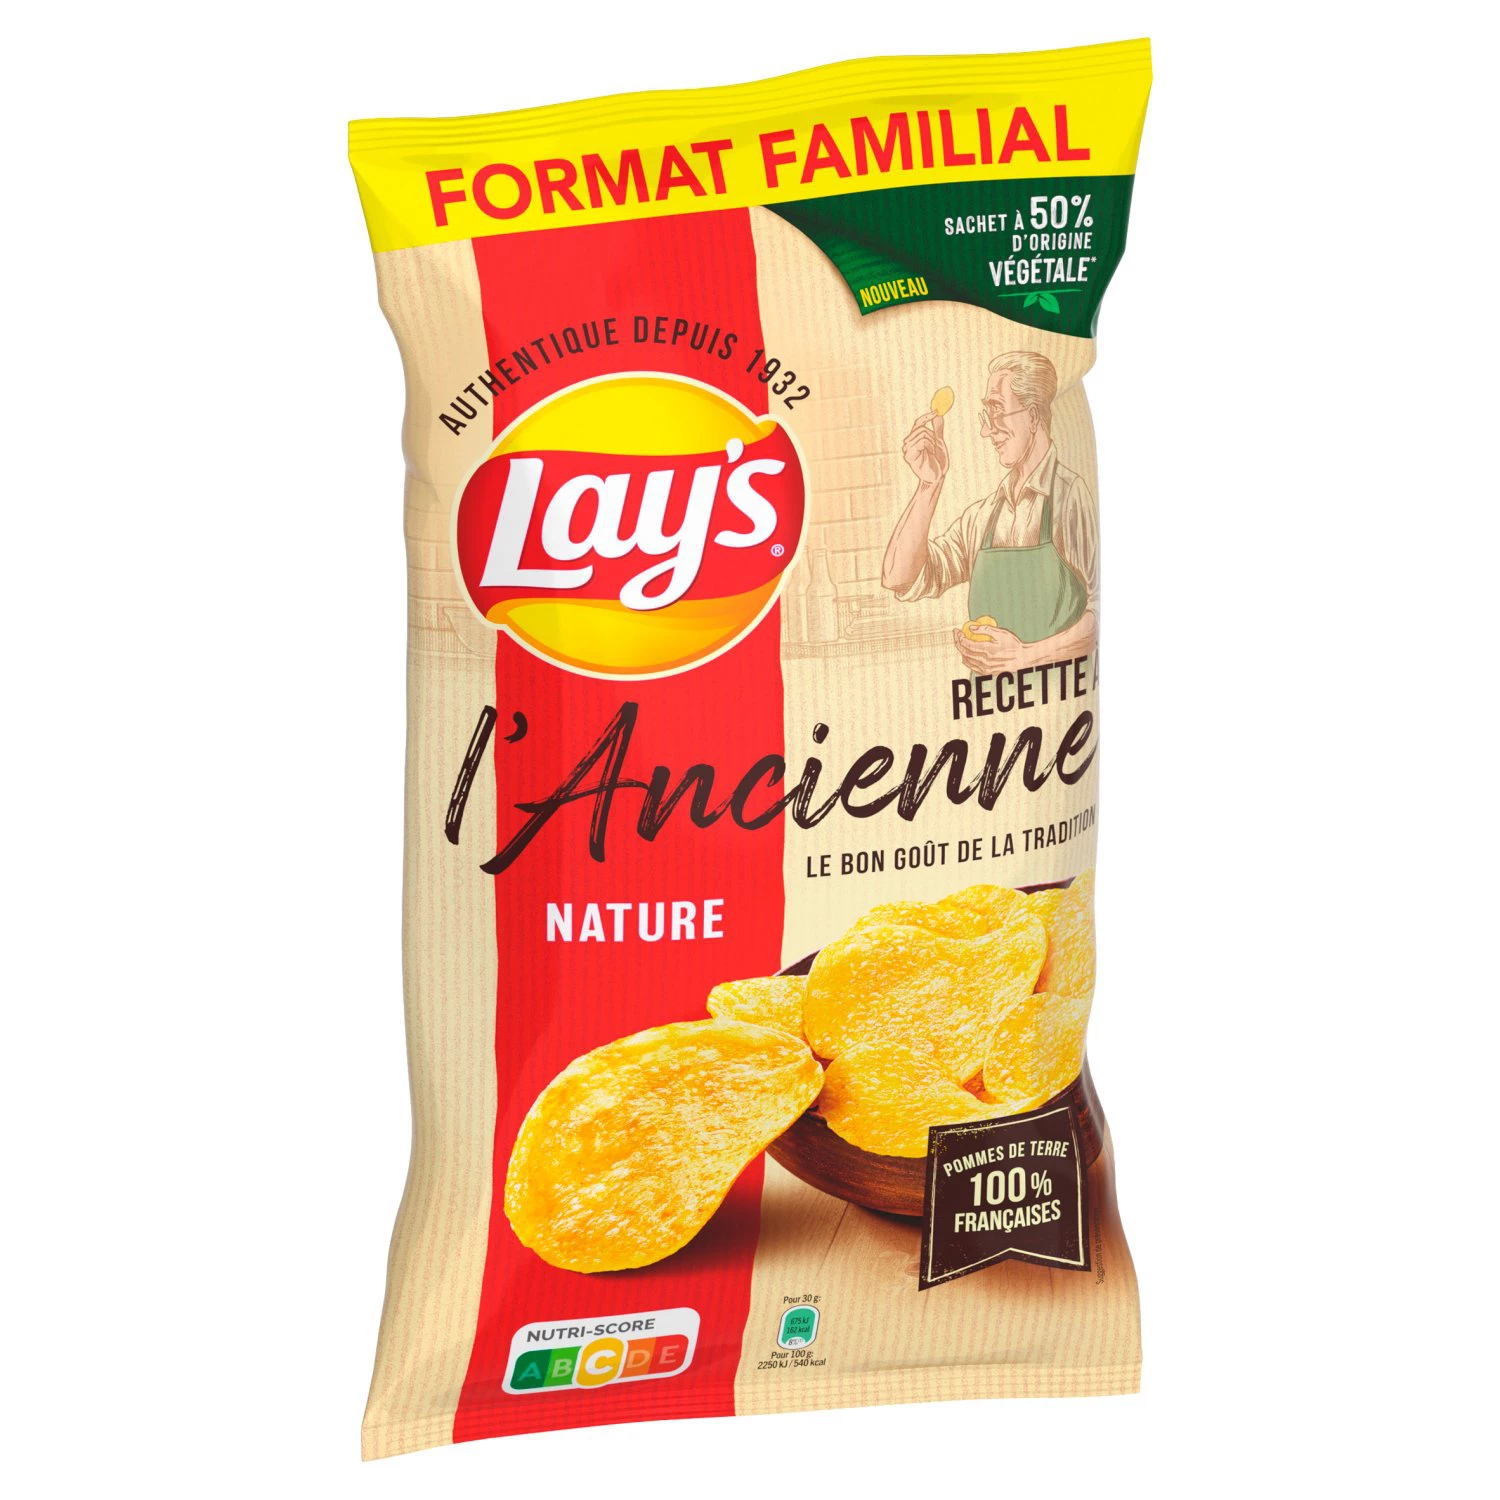 Familie ouderwetse chips, 295g - LAY'S